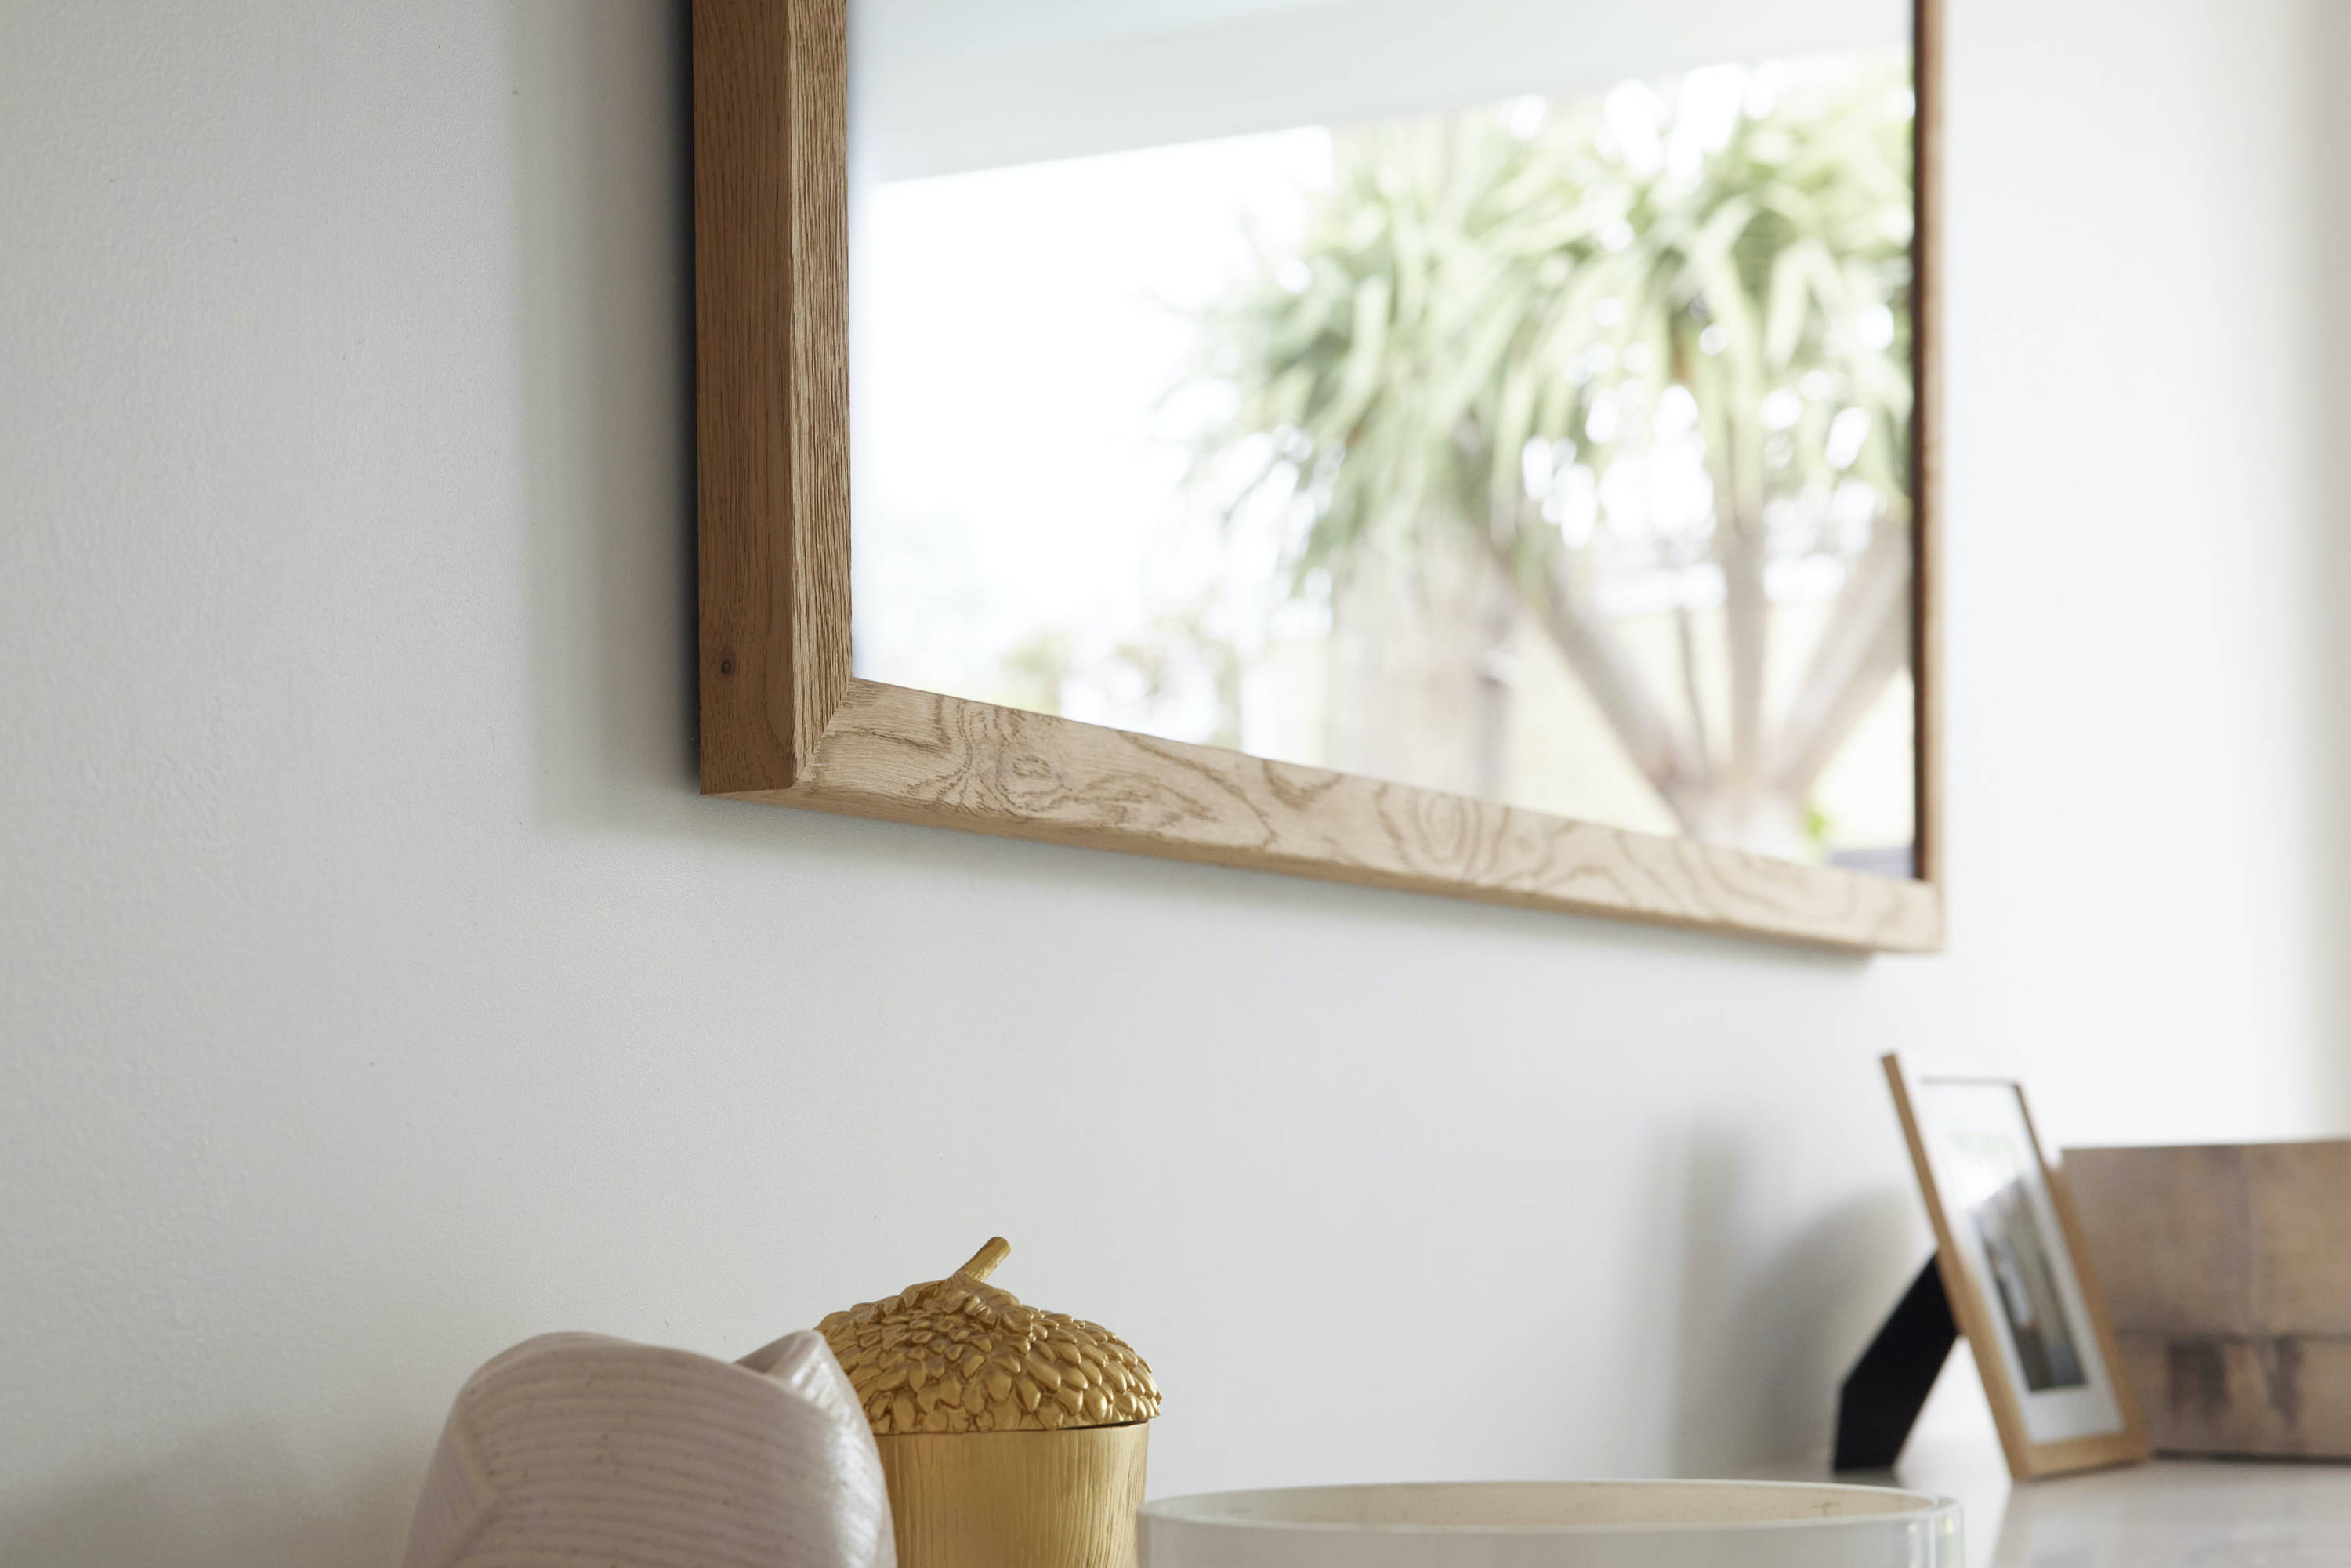 TV-Mirror Modern Rustic Oak Frame by FRAMING TO A T - A TV-Mirror with an oak frame in a light, fresh bedroom.